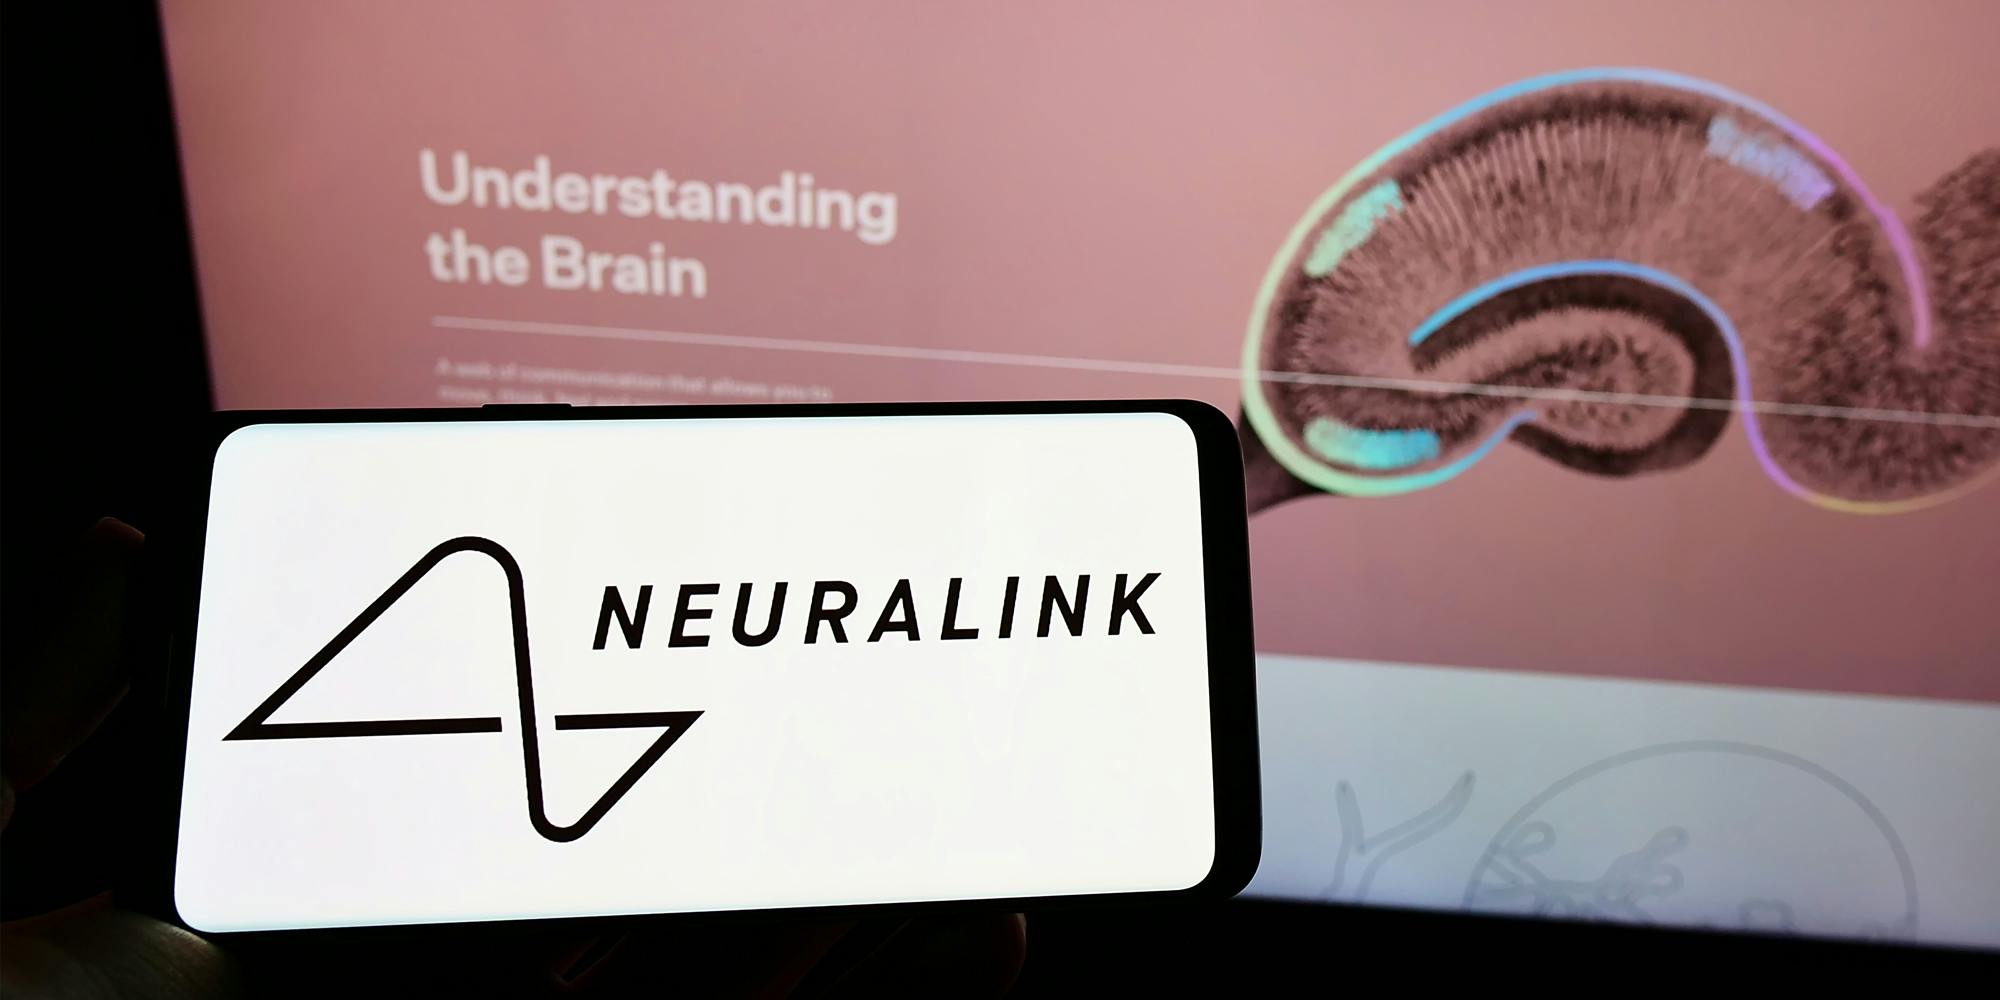 Neuralink website on monitor with hand holding phone with "Neuralink" on screen in front